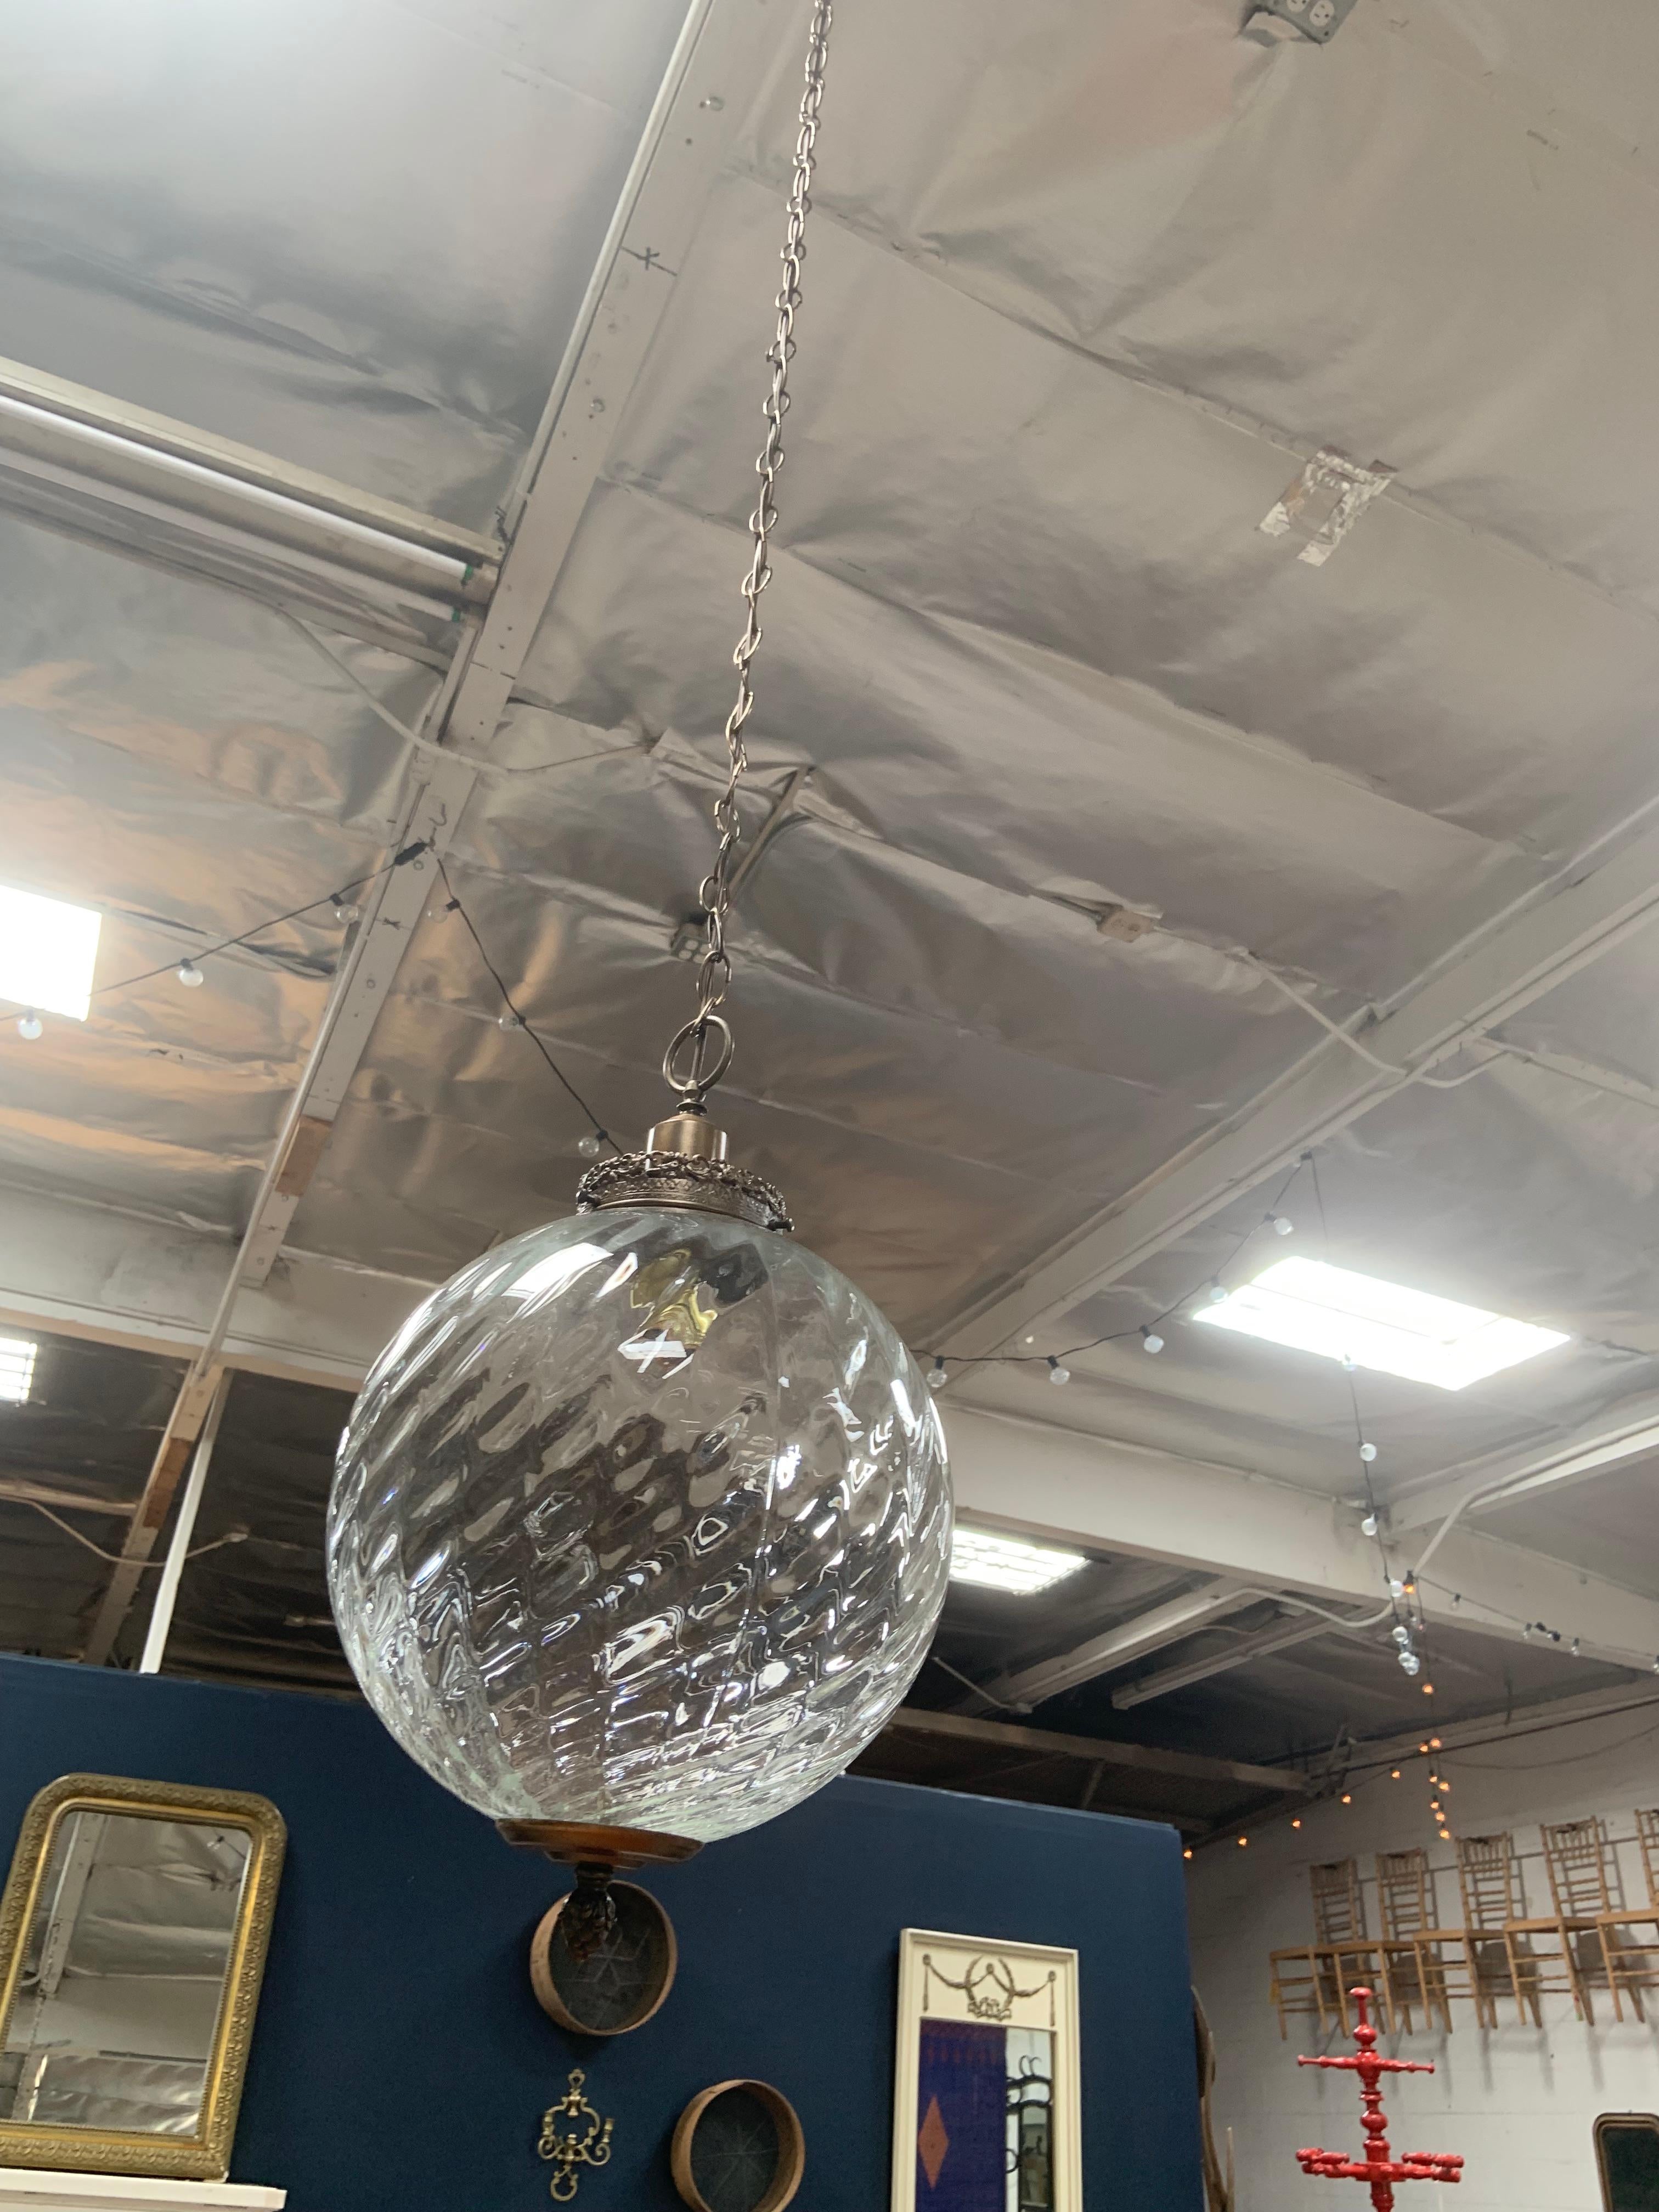 This uniquely designed glass hanging pendant has diagonal ridges and a brass base with Victorian style accents. The neutral, clear glass globe makes this piece fit beautifully in any space.